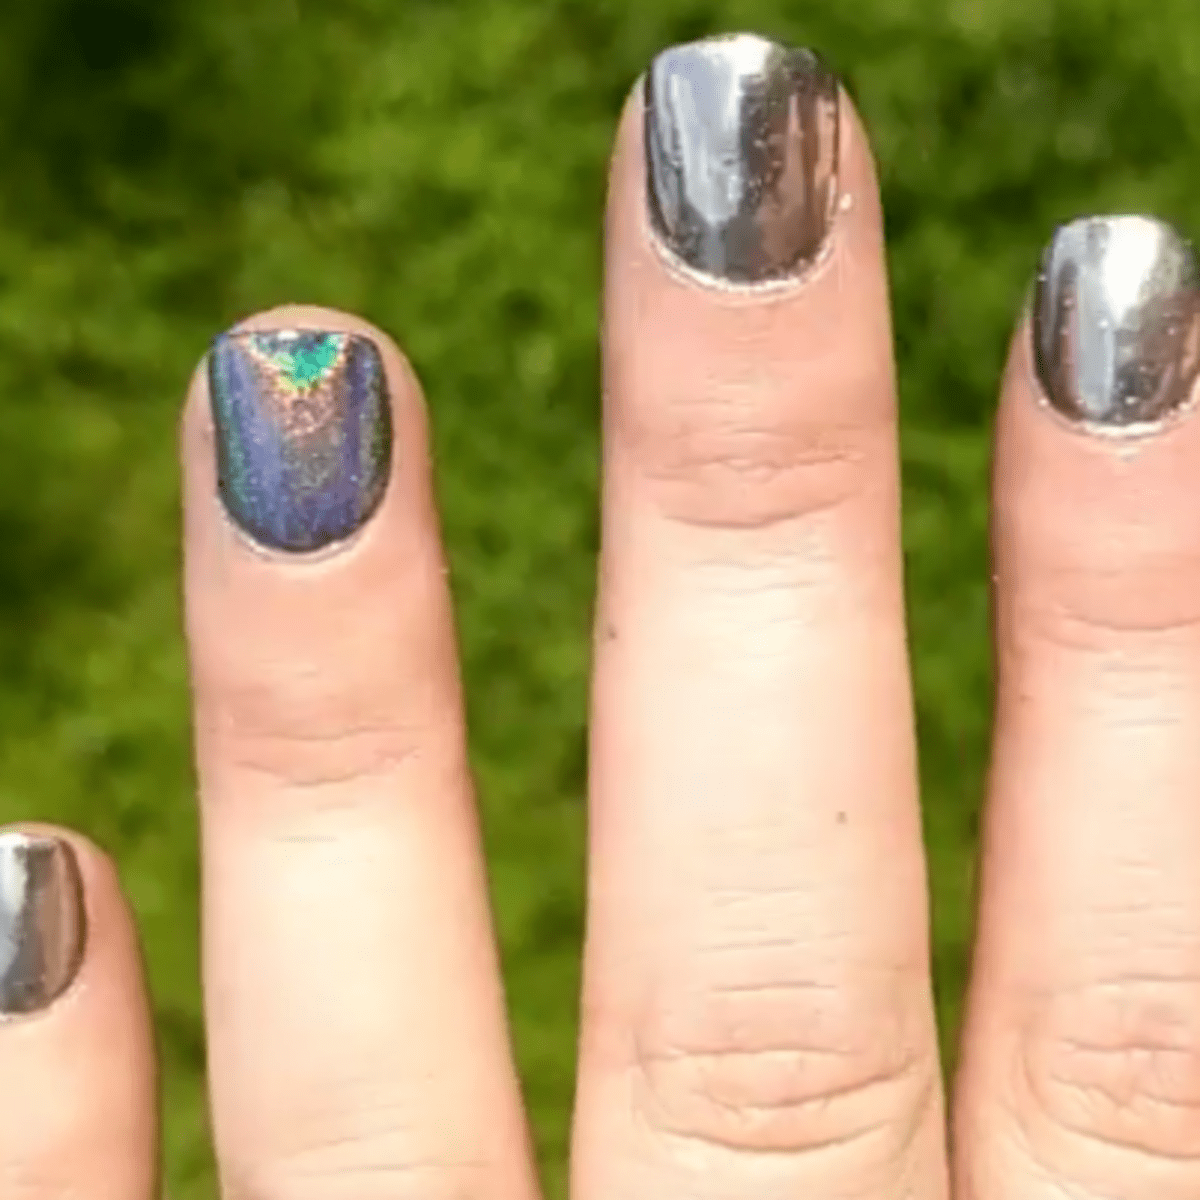 5 ways to remove acrylic nails without acetone